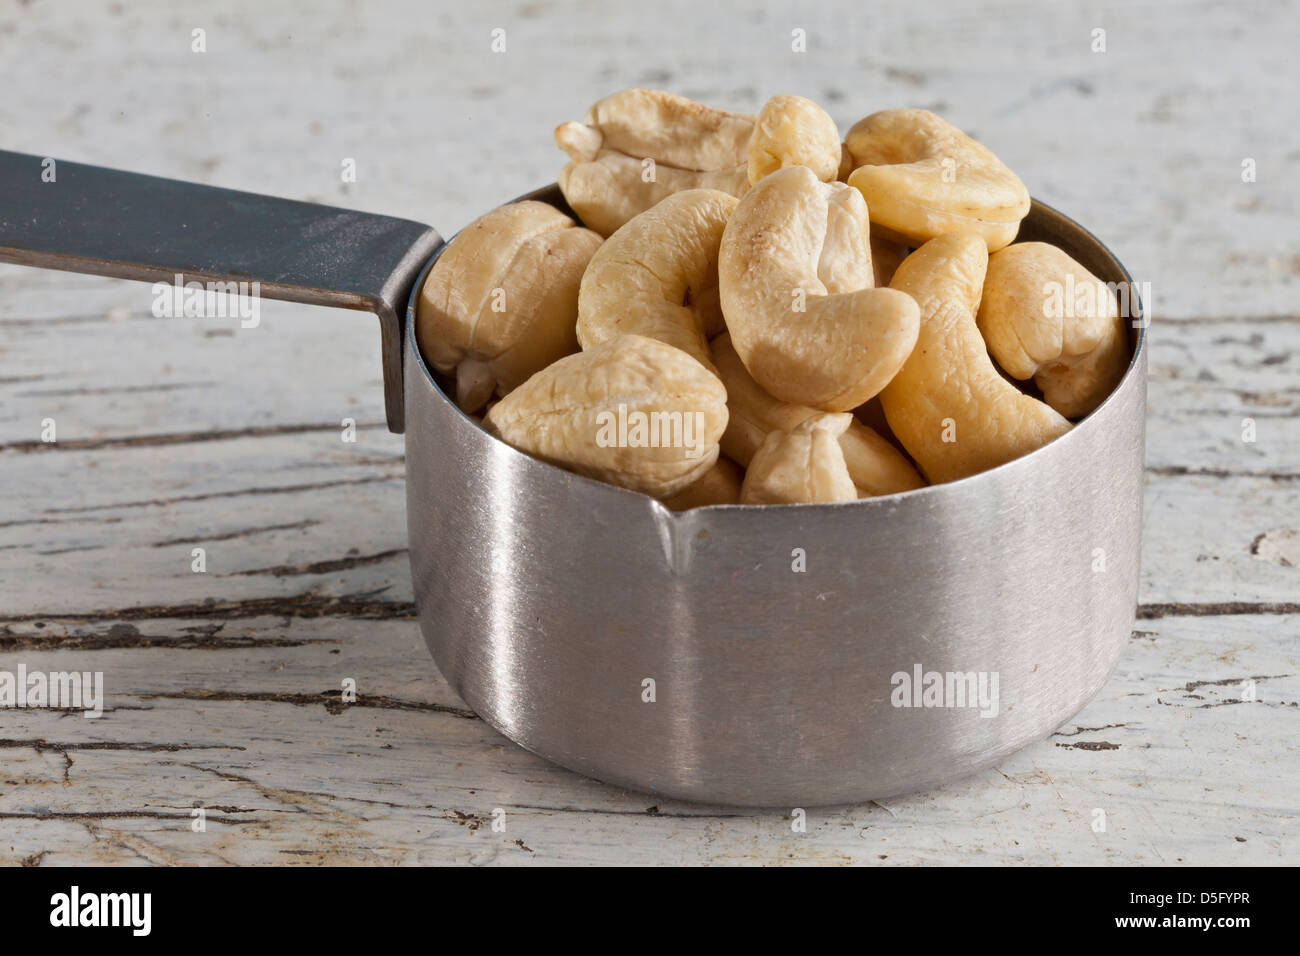 Raw Cashew nuts in a kitchen Stock Photo